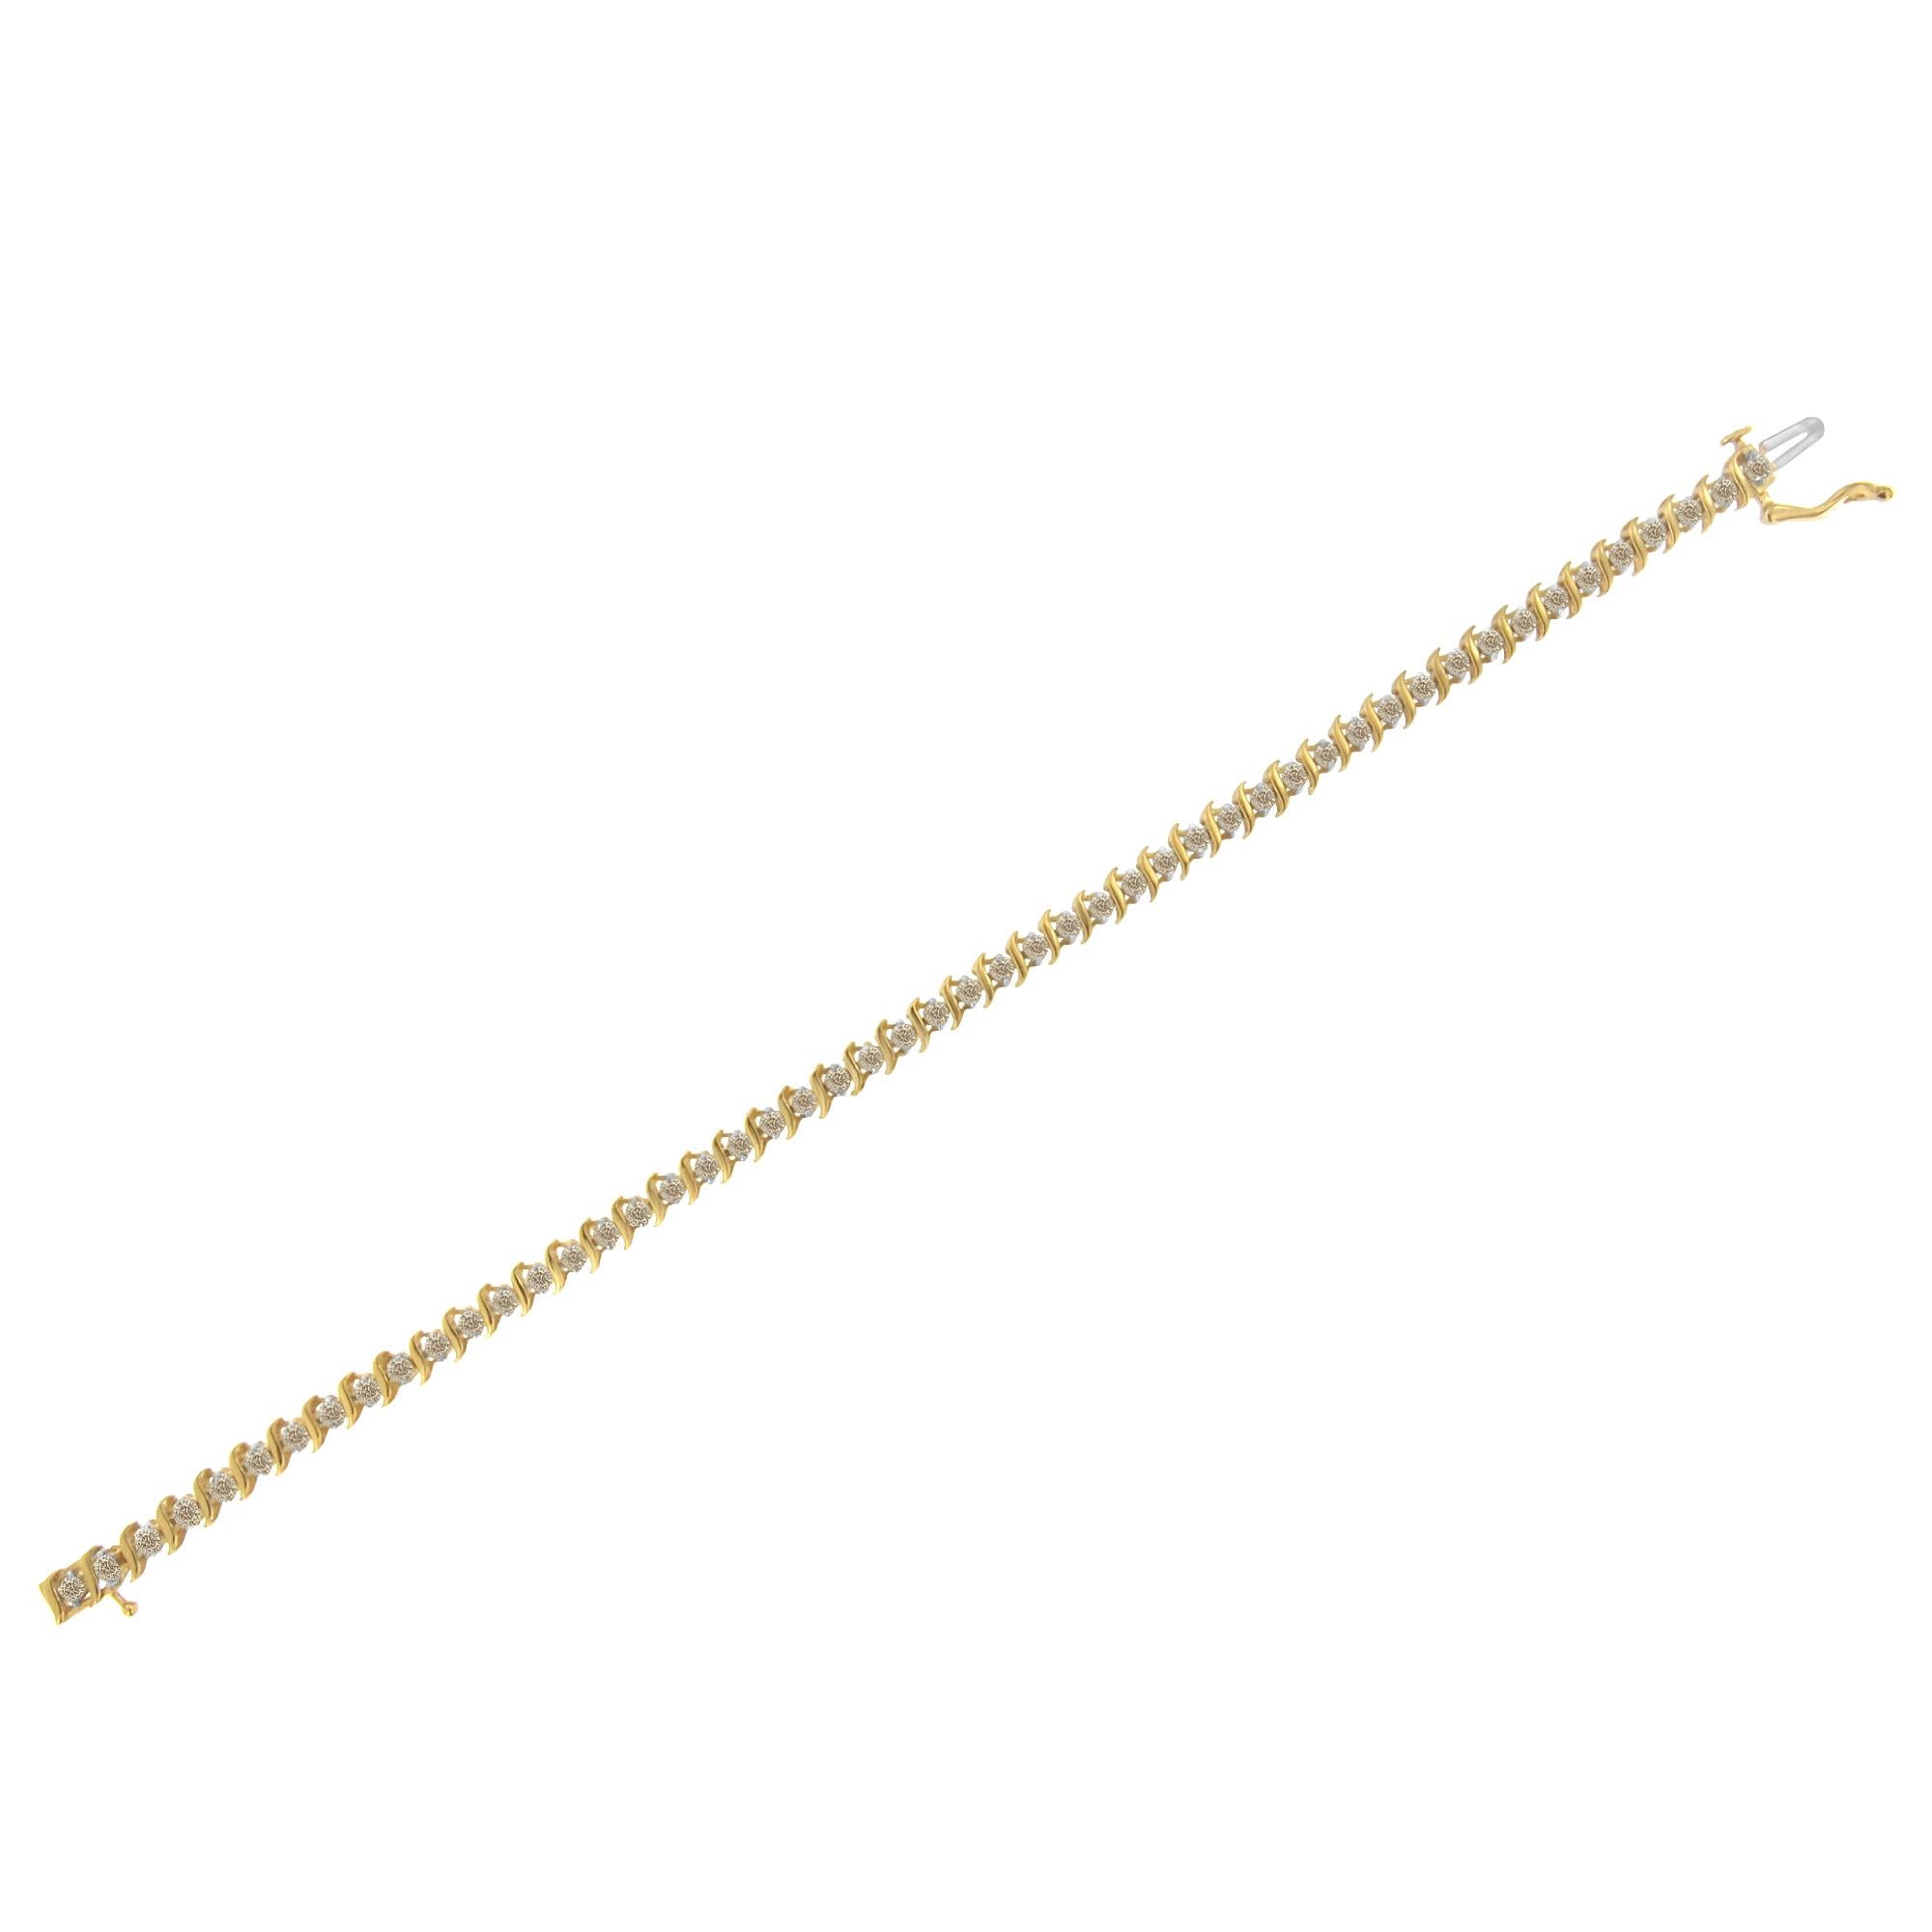 Contemporary Yellow Gold Plated Sterling Silver 2.0 Carat Diamond Link Tennis Bracelet For Sale